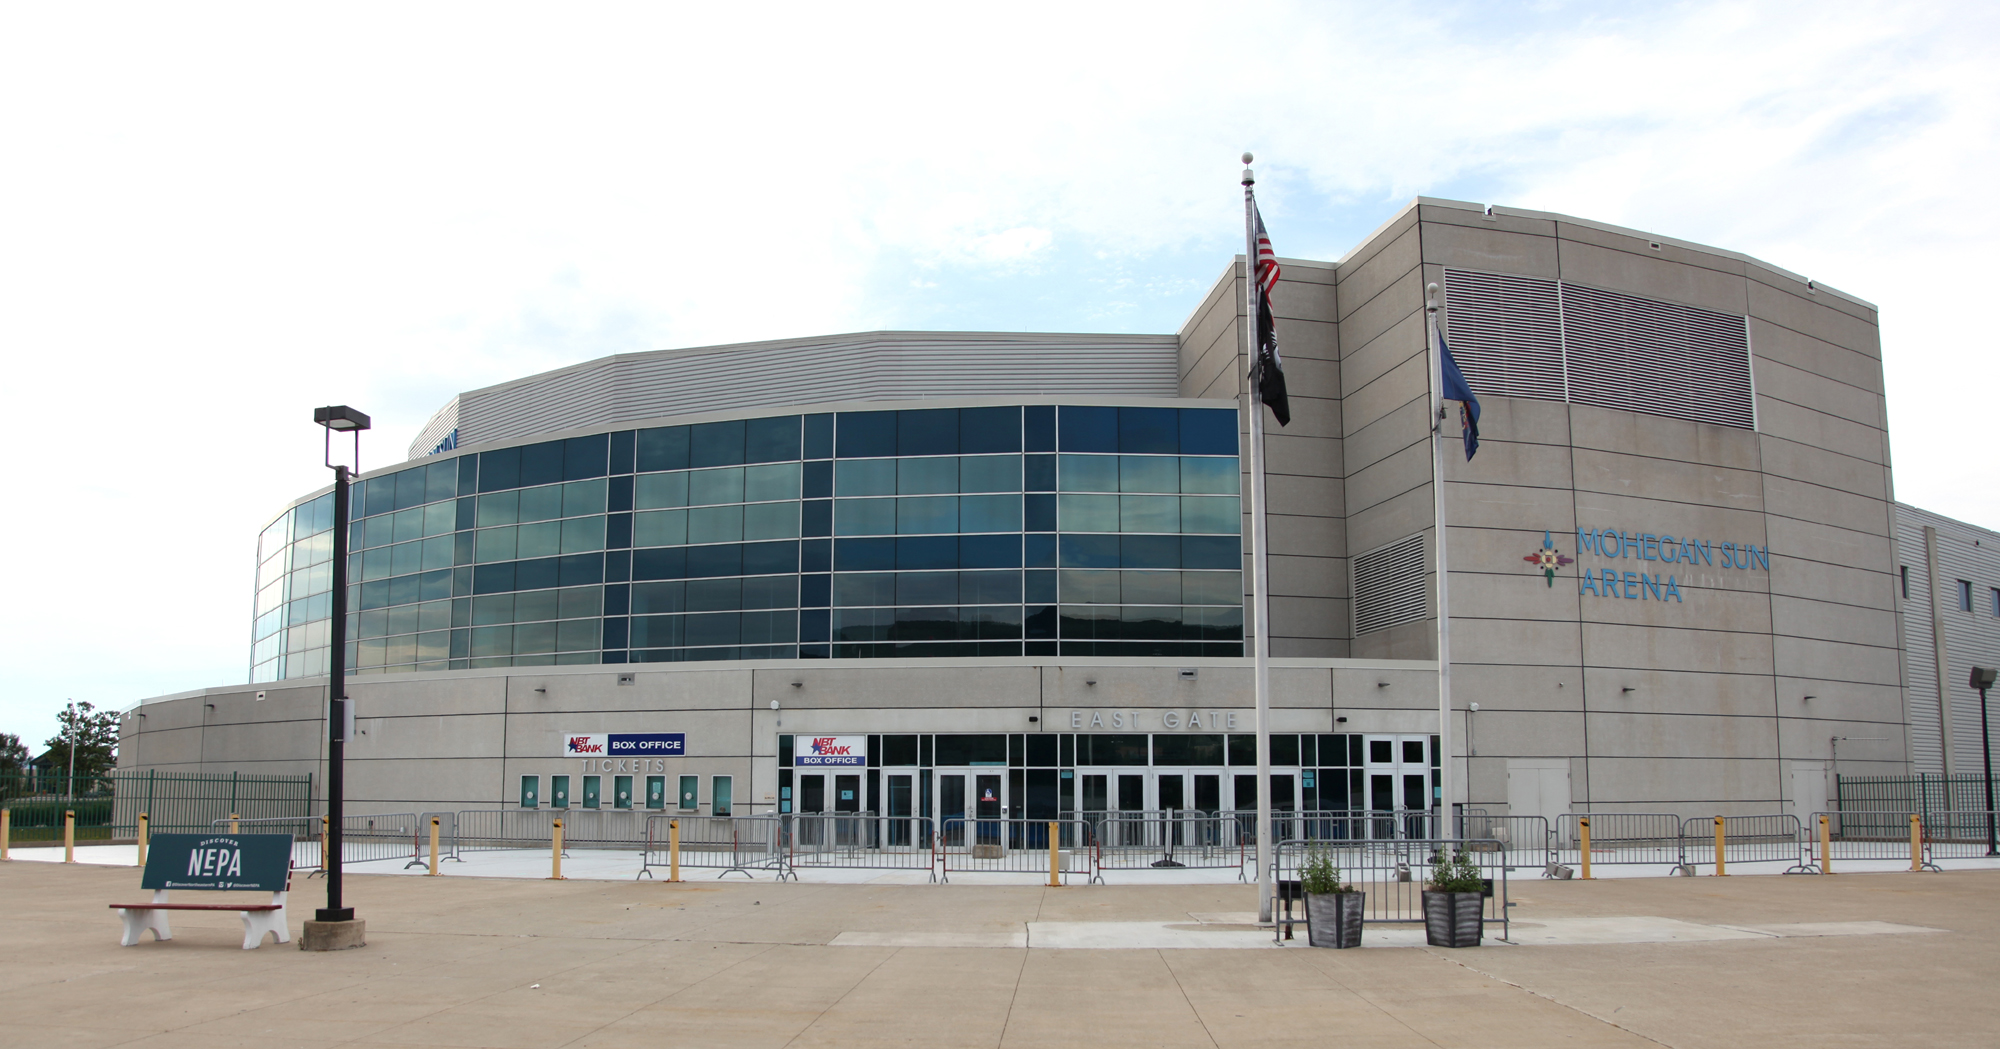 Mohegan Sun Arena in WilkesBarre selling excess equipment and